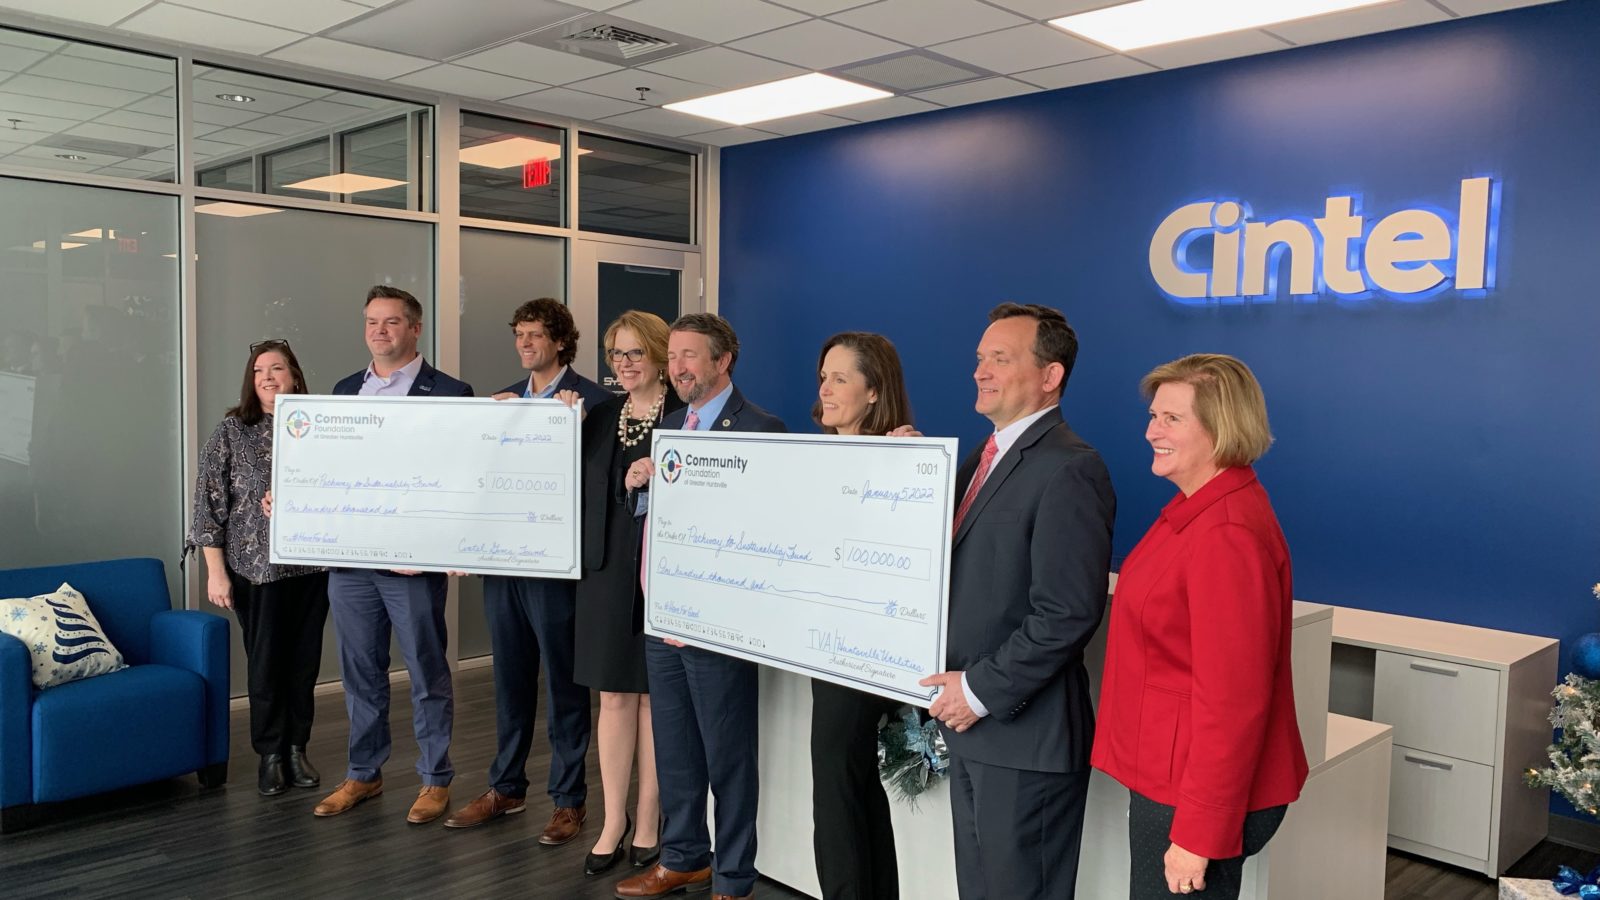 Cintel Donated $100K to the Community Foundation’s Pathway to Sustainability Fund